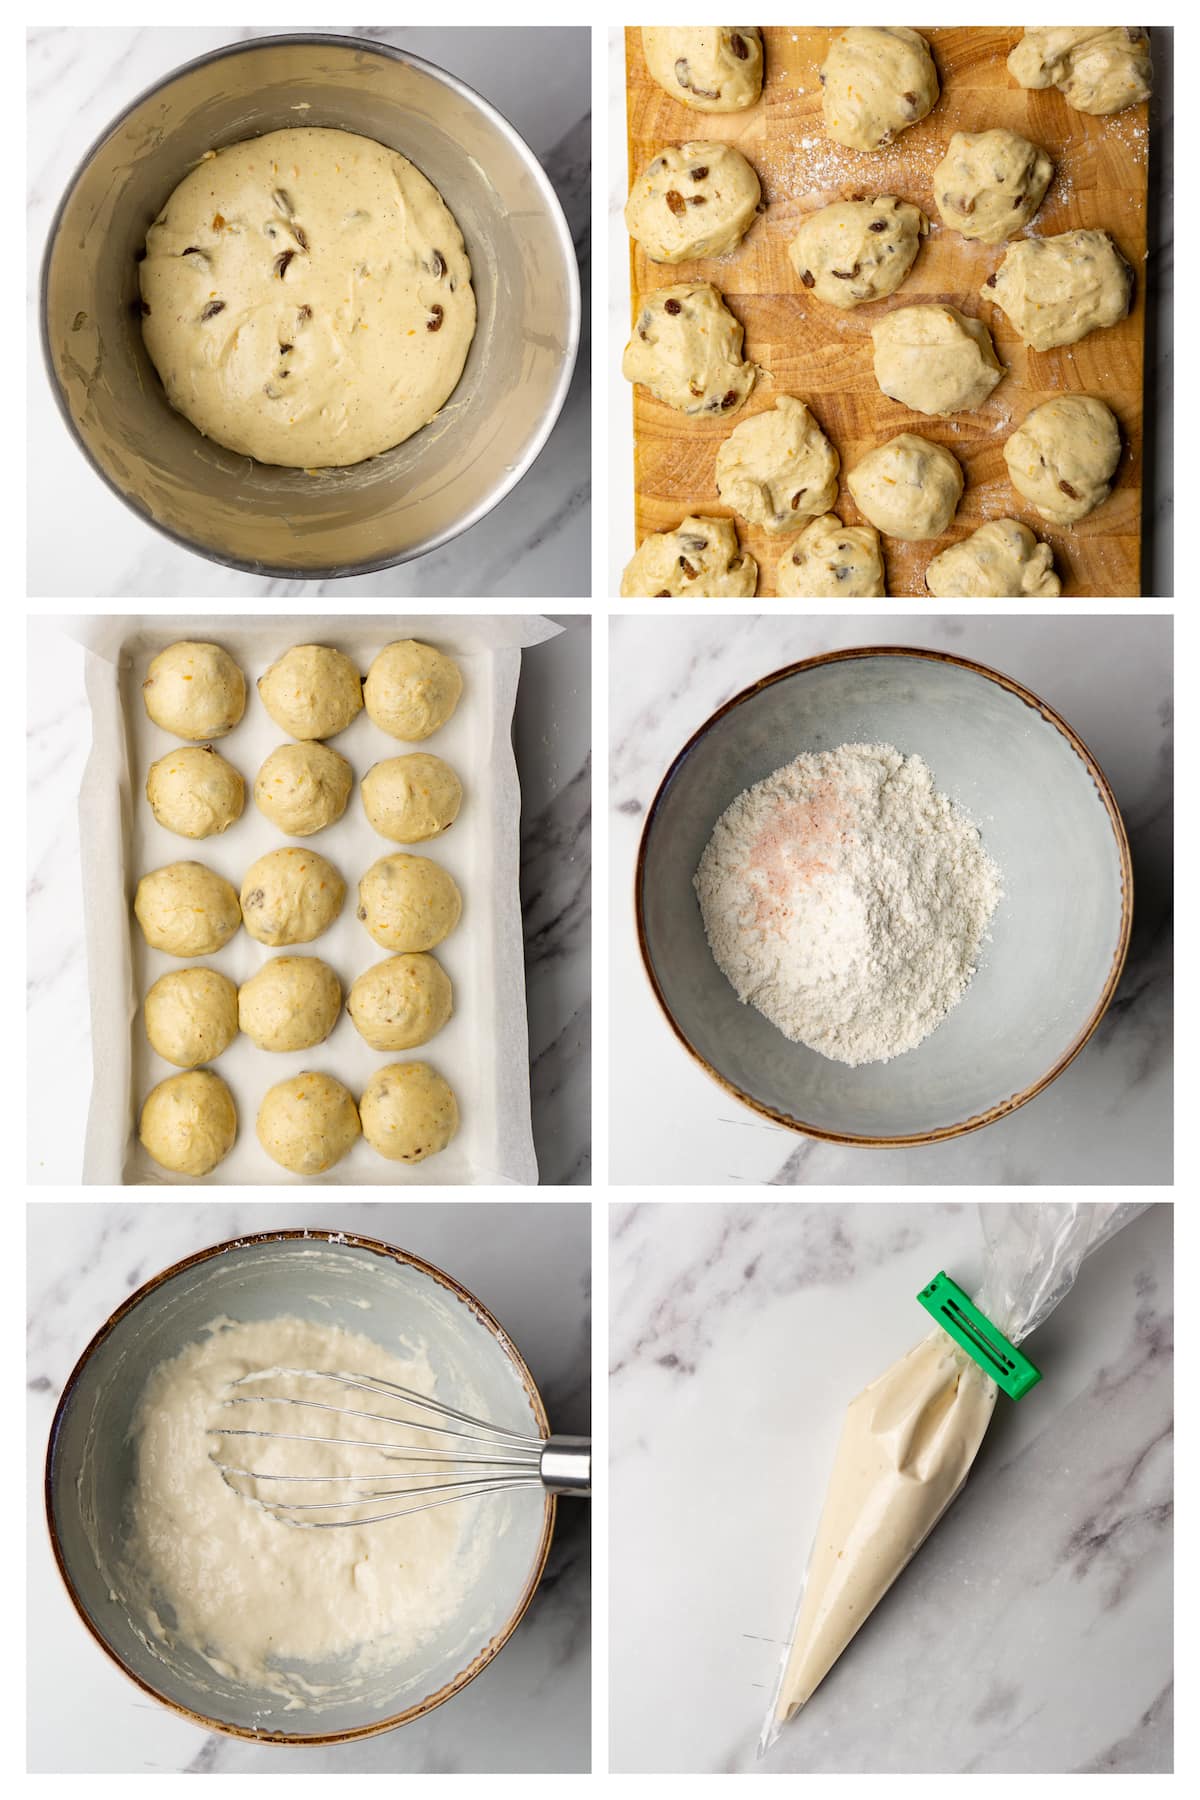 Collage image showing six steps to shape hot cross buns.